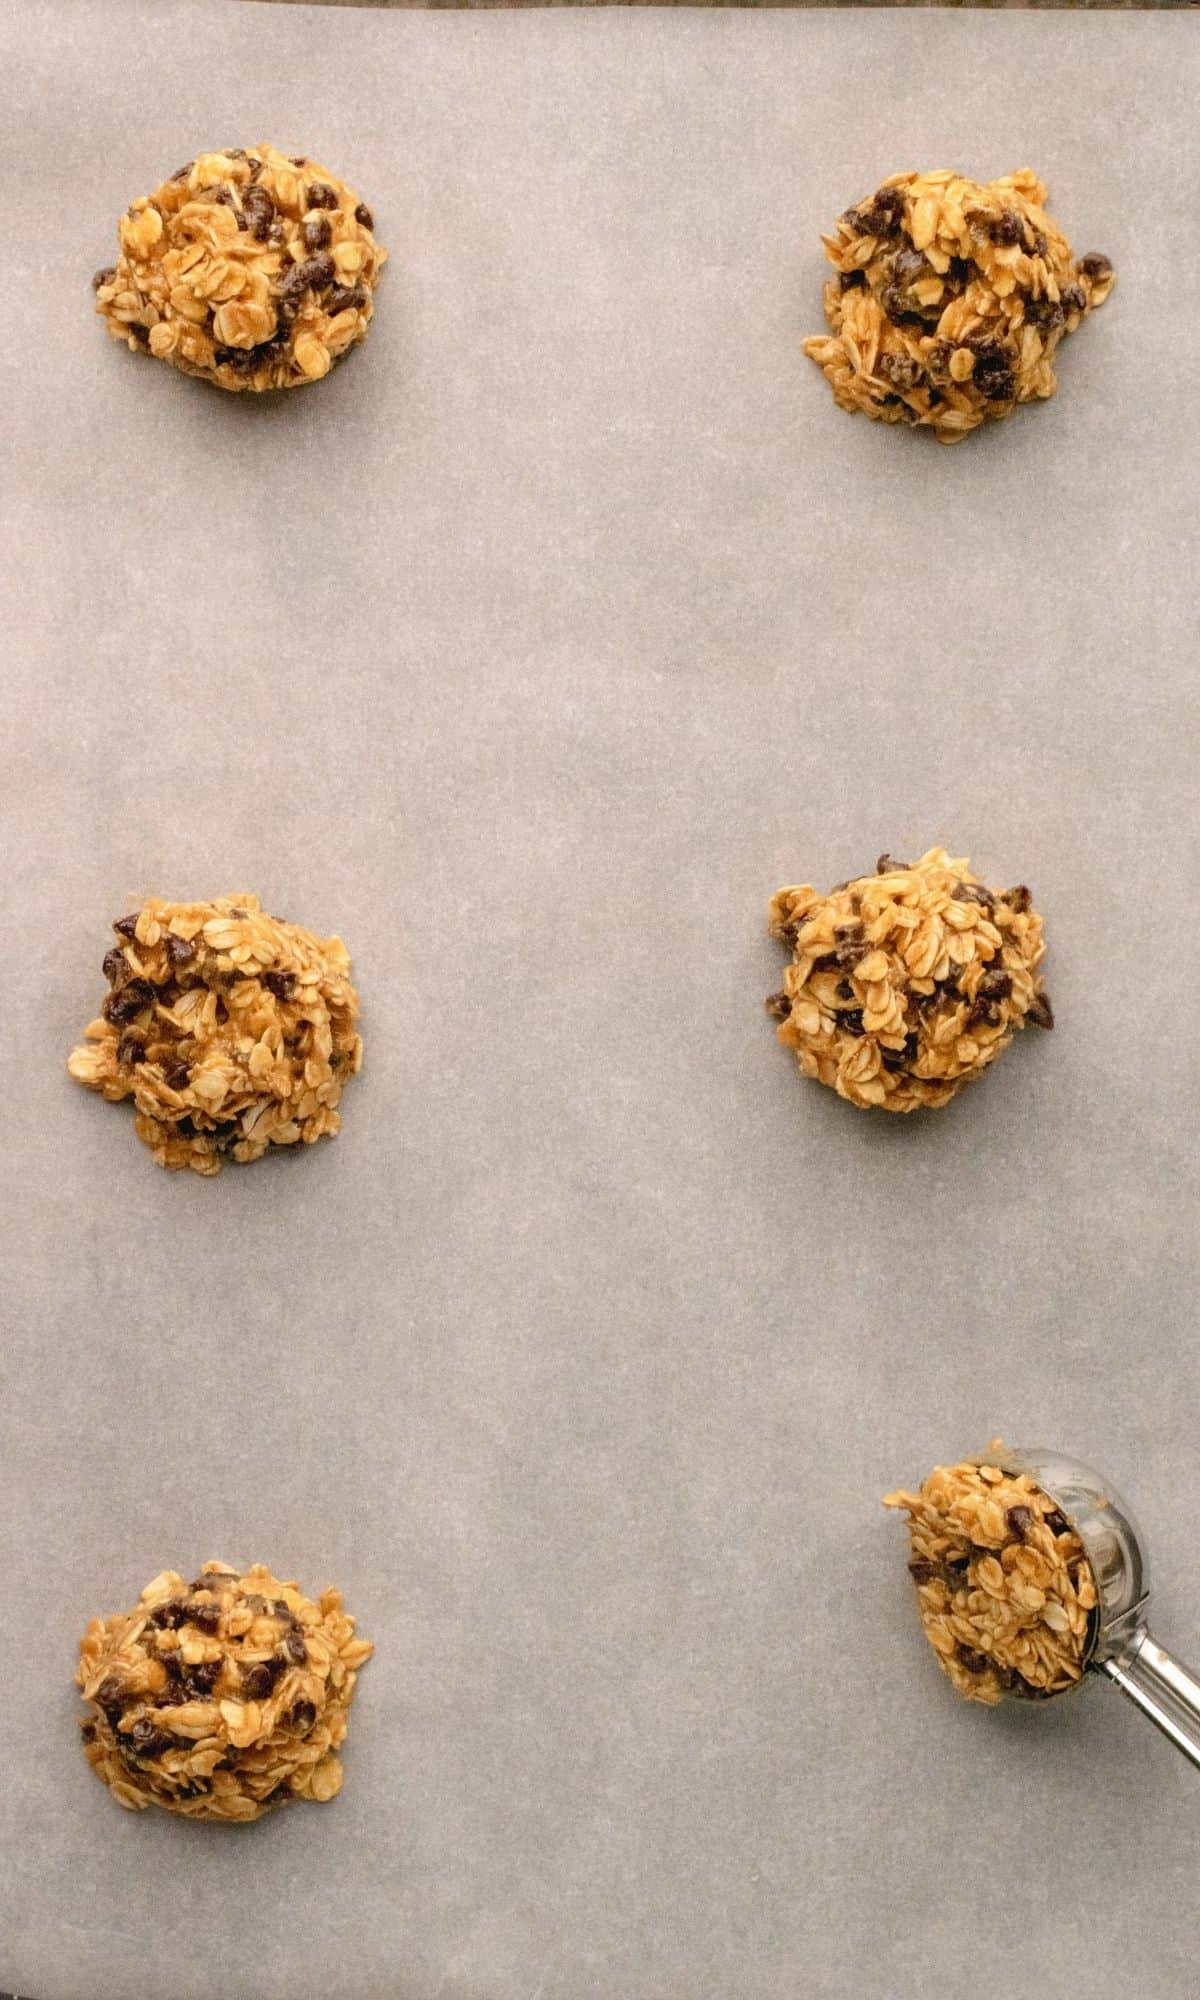 Peanut butter chocolate chip cookie dough being placed on a baking sheet.